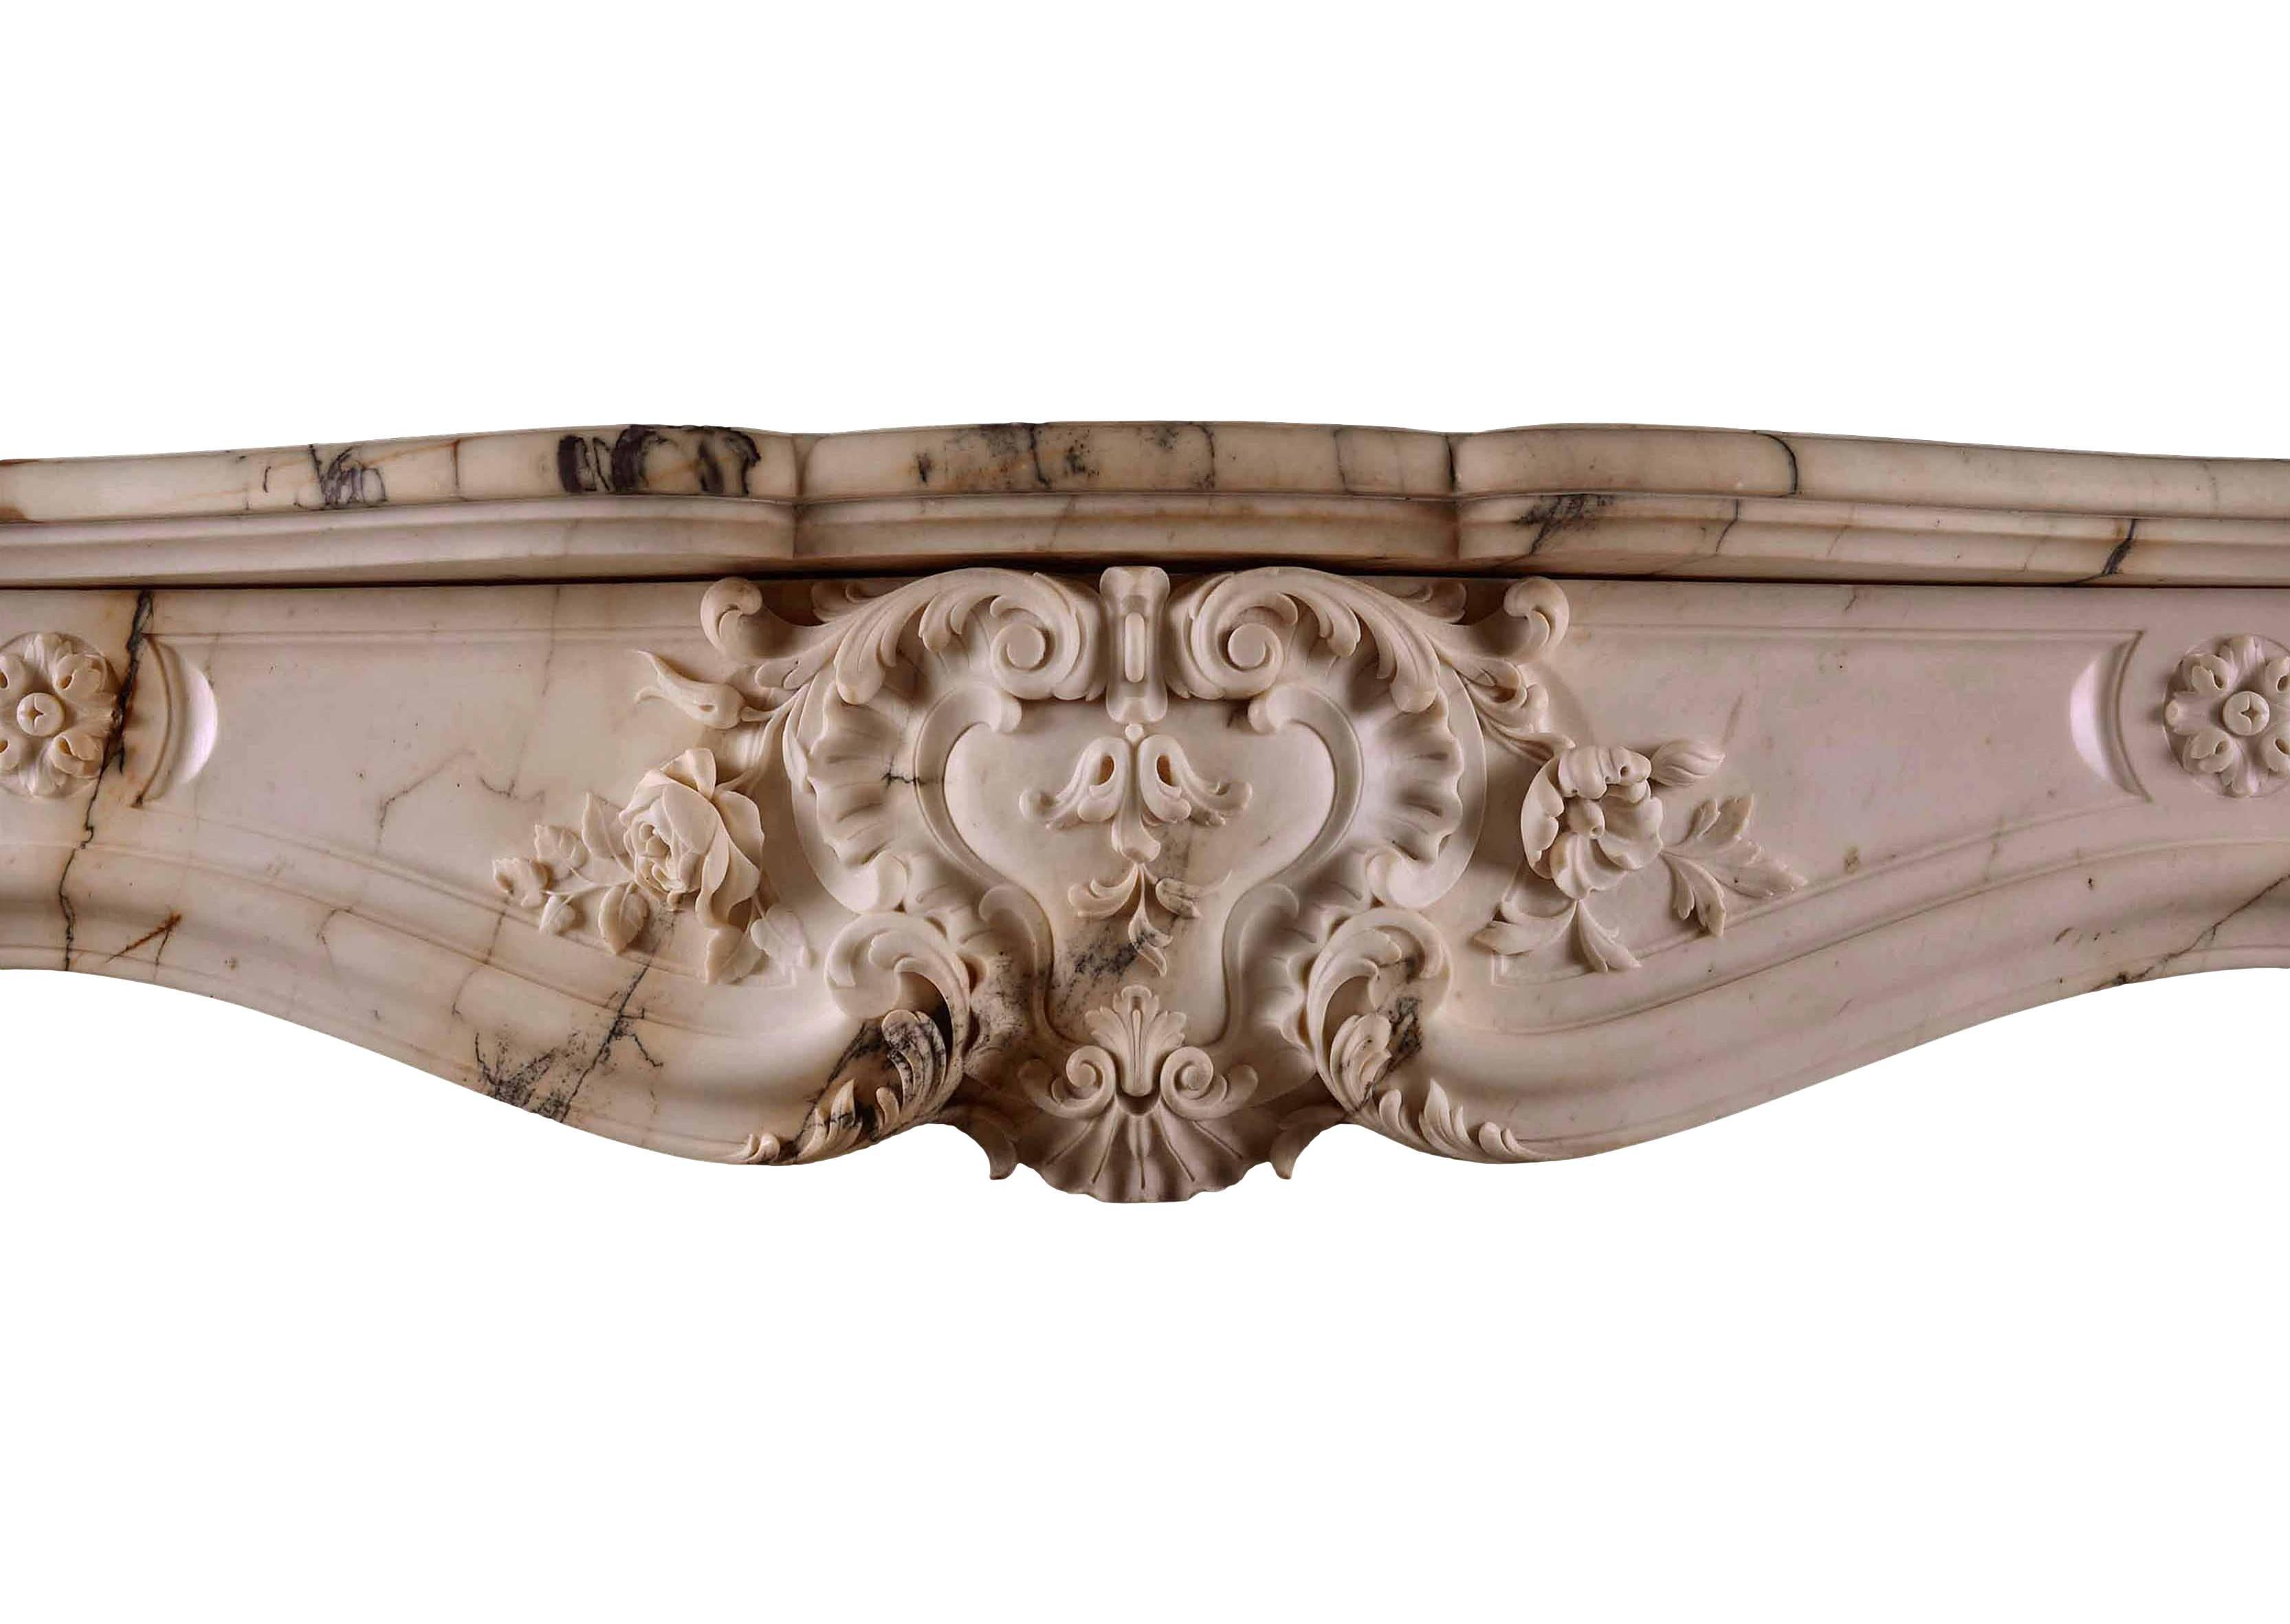 A very fine French Louis XV style fireplace in Paonazzo marble. The panelled frieze with carved central cartouche, foliage and shells, flanked by rosette paterae. The jambs with scrolls to base, surmounted by stiff acanthus leaves, foliage and